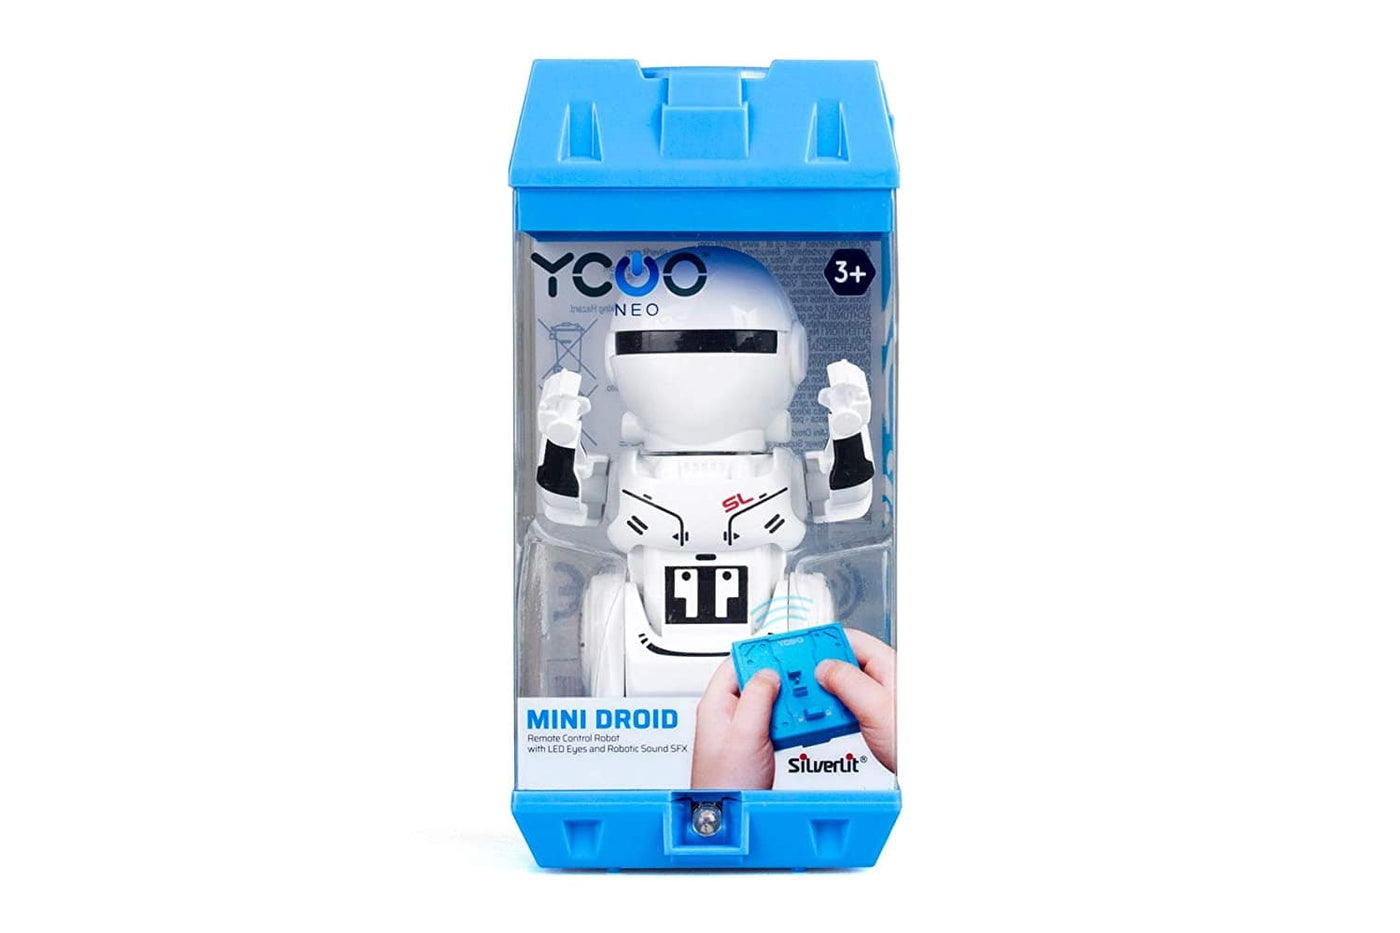 YCOO Mini Droid Remote Control Robot - OP One, Palm Size Remote Control Robot with LED Eyes and Robotic Sound SFX by Silverlit Toys Hong Kong Toy